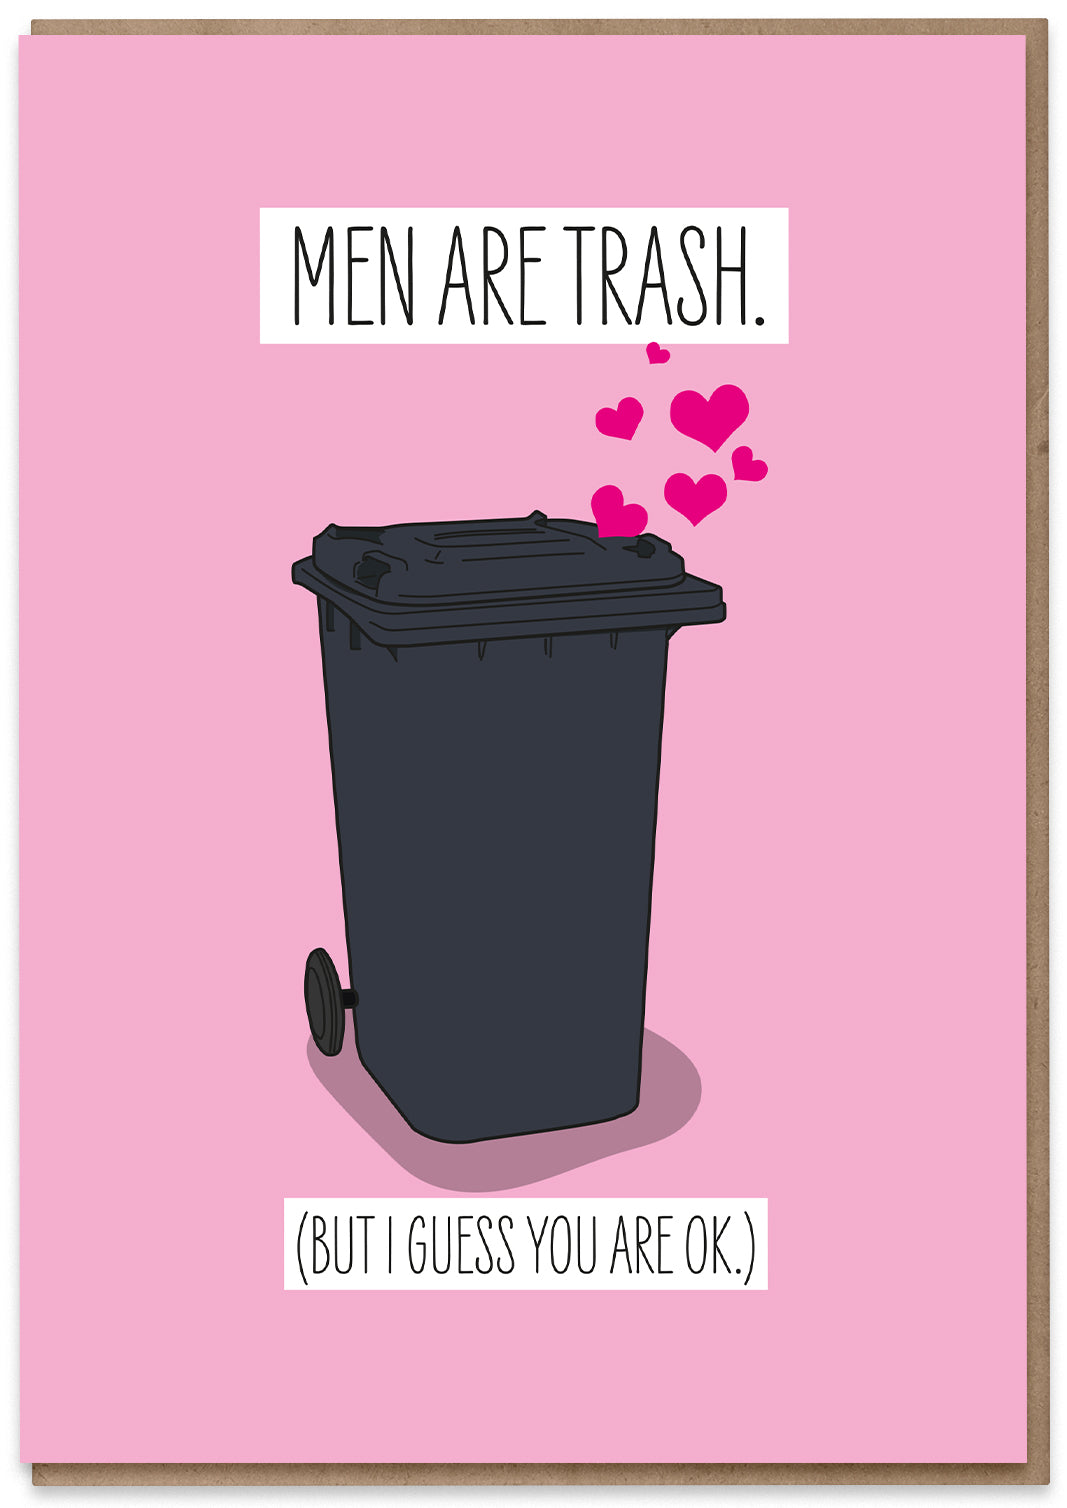 Men Are Trash.. But You're OK